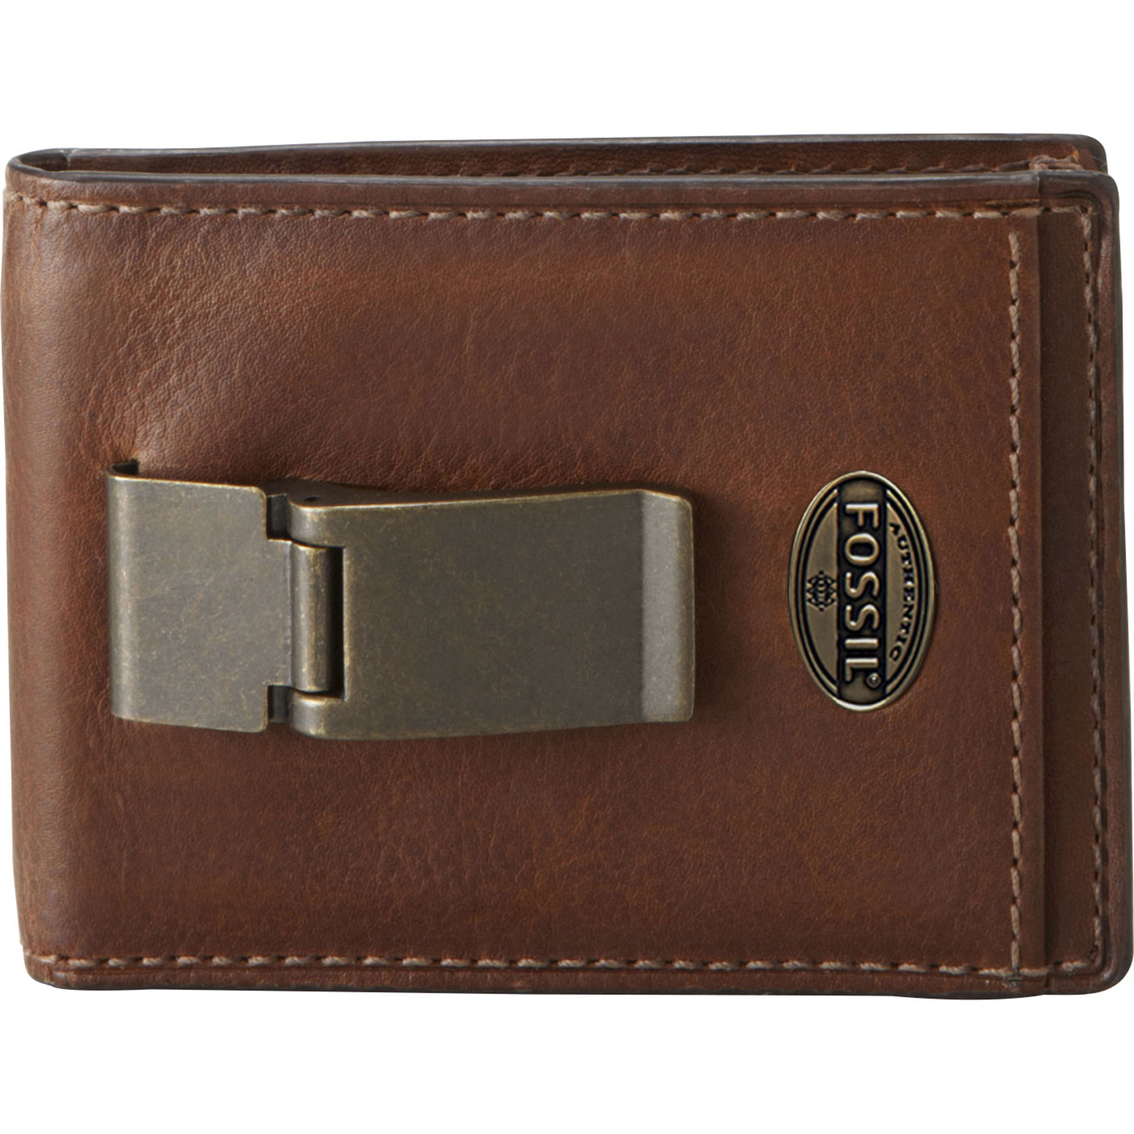 Fossil Estate Id Bifold Front Pocket Wallet With Money Clip | Wallets & Money Clips | Apparel ...